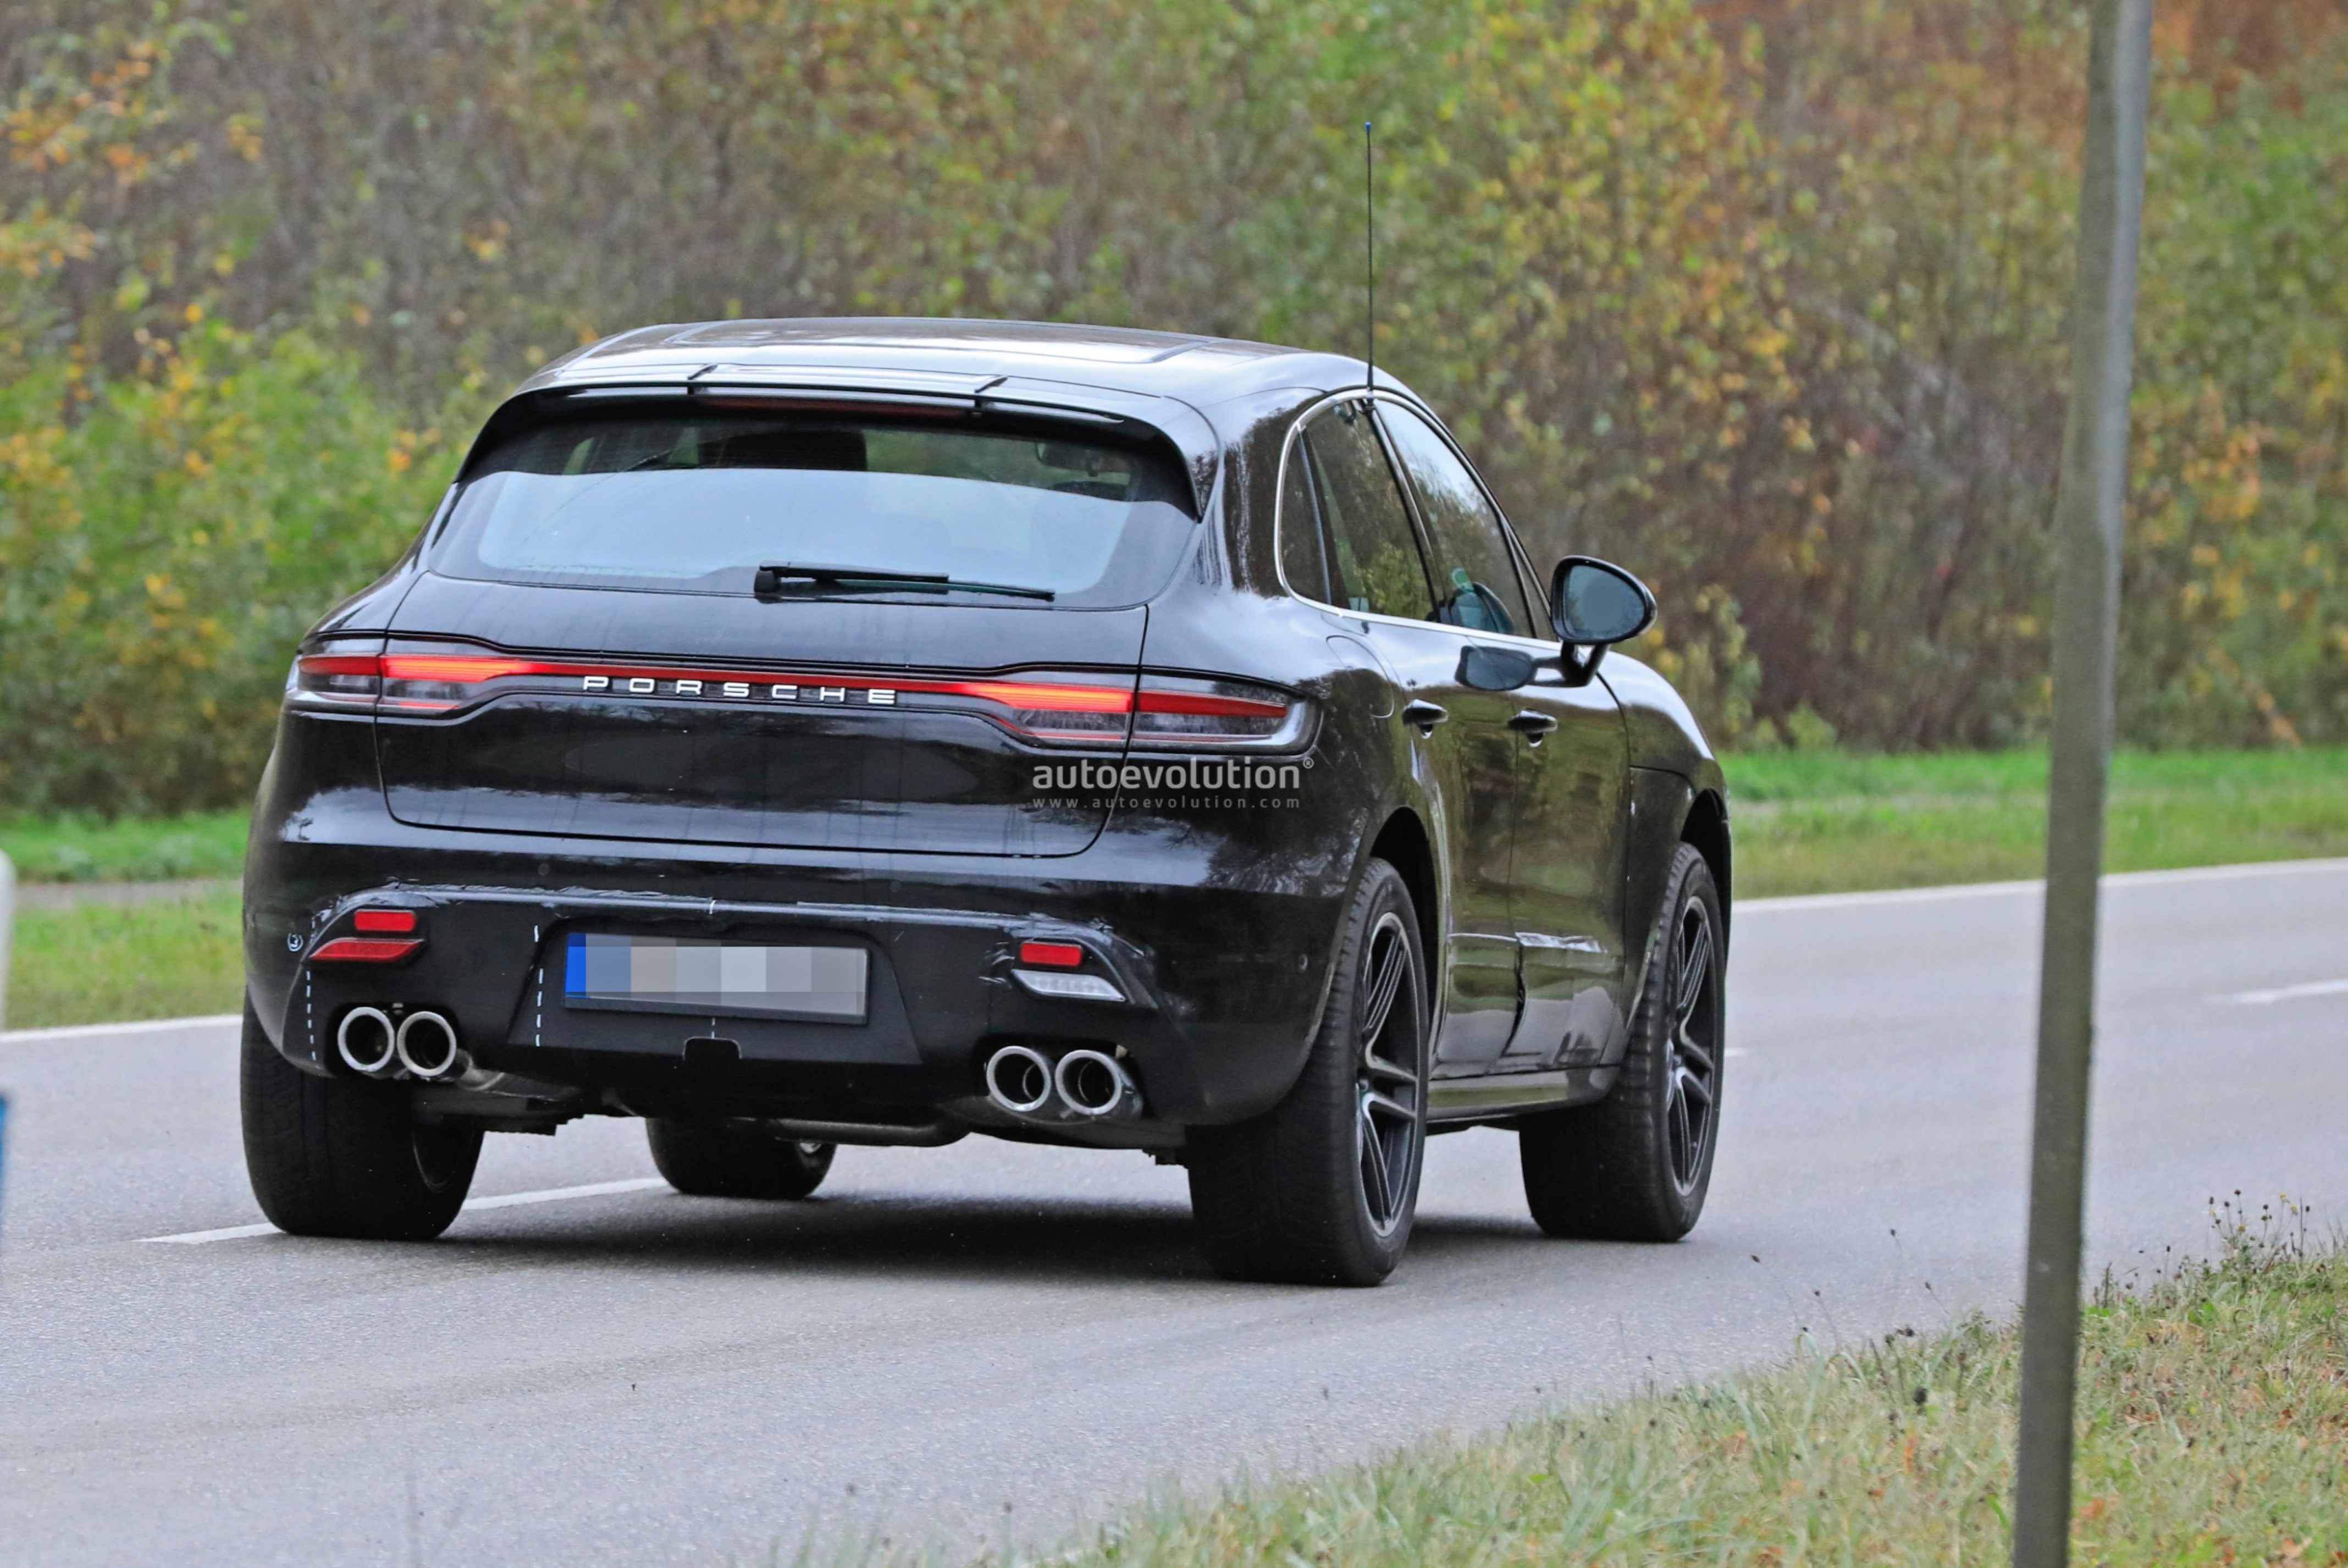 2022 Porsche Macan Facelift Spied With Redesigned Bumpers, New